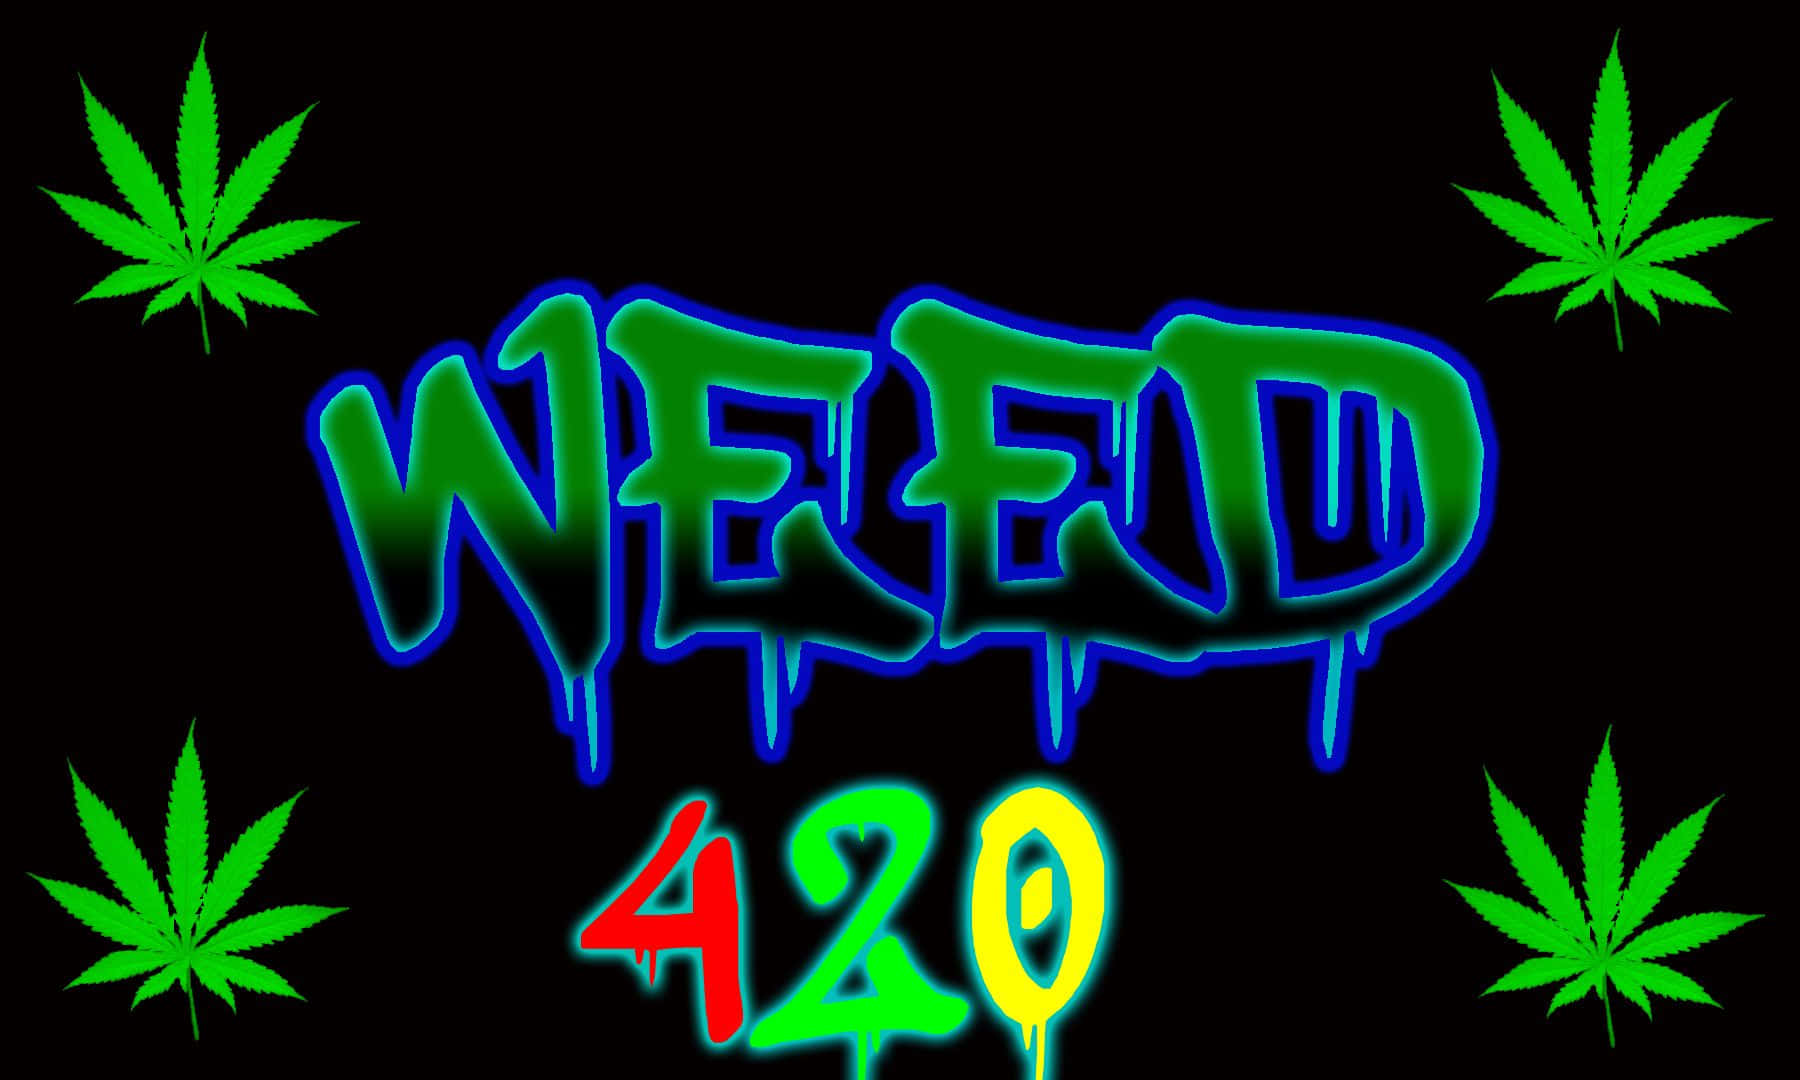 A vibrant 420 celebration with smoke and green leaves